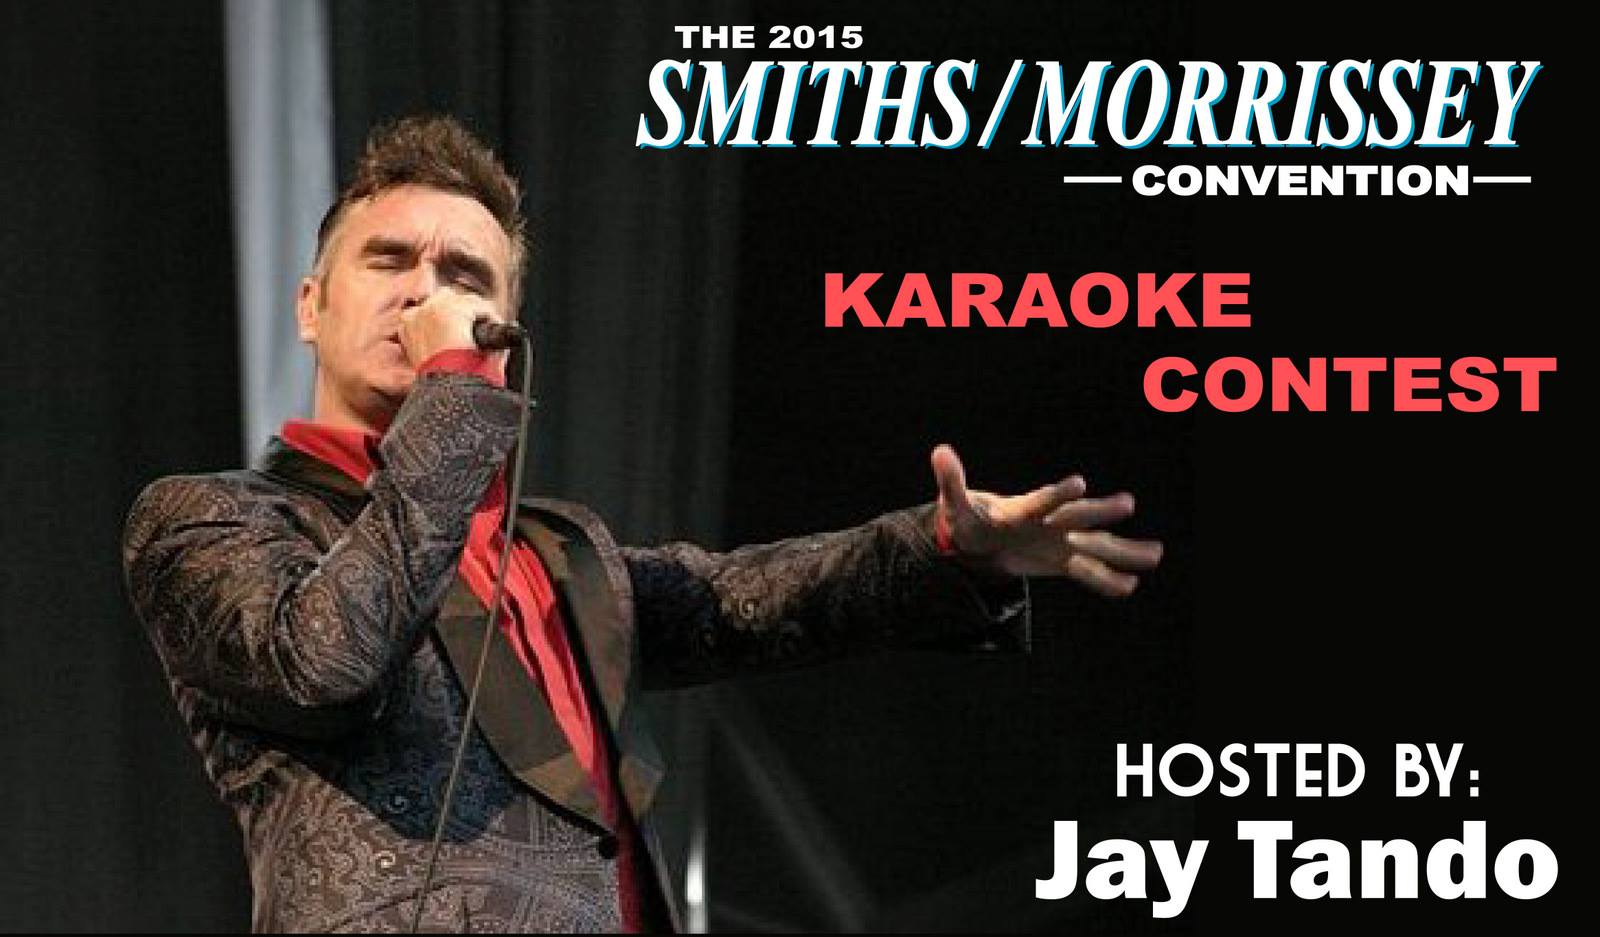 The 2015 L.A. SMITHS/MORRISSEY Convention